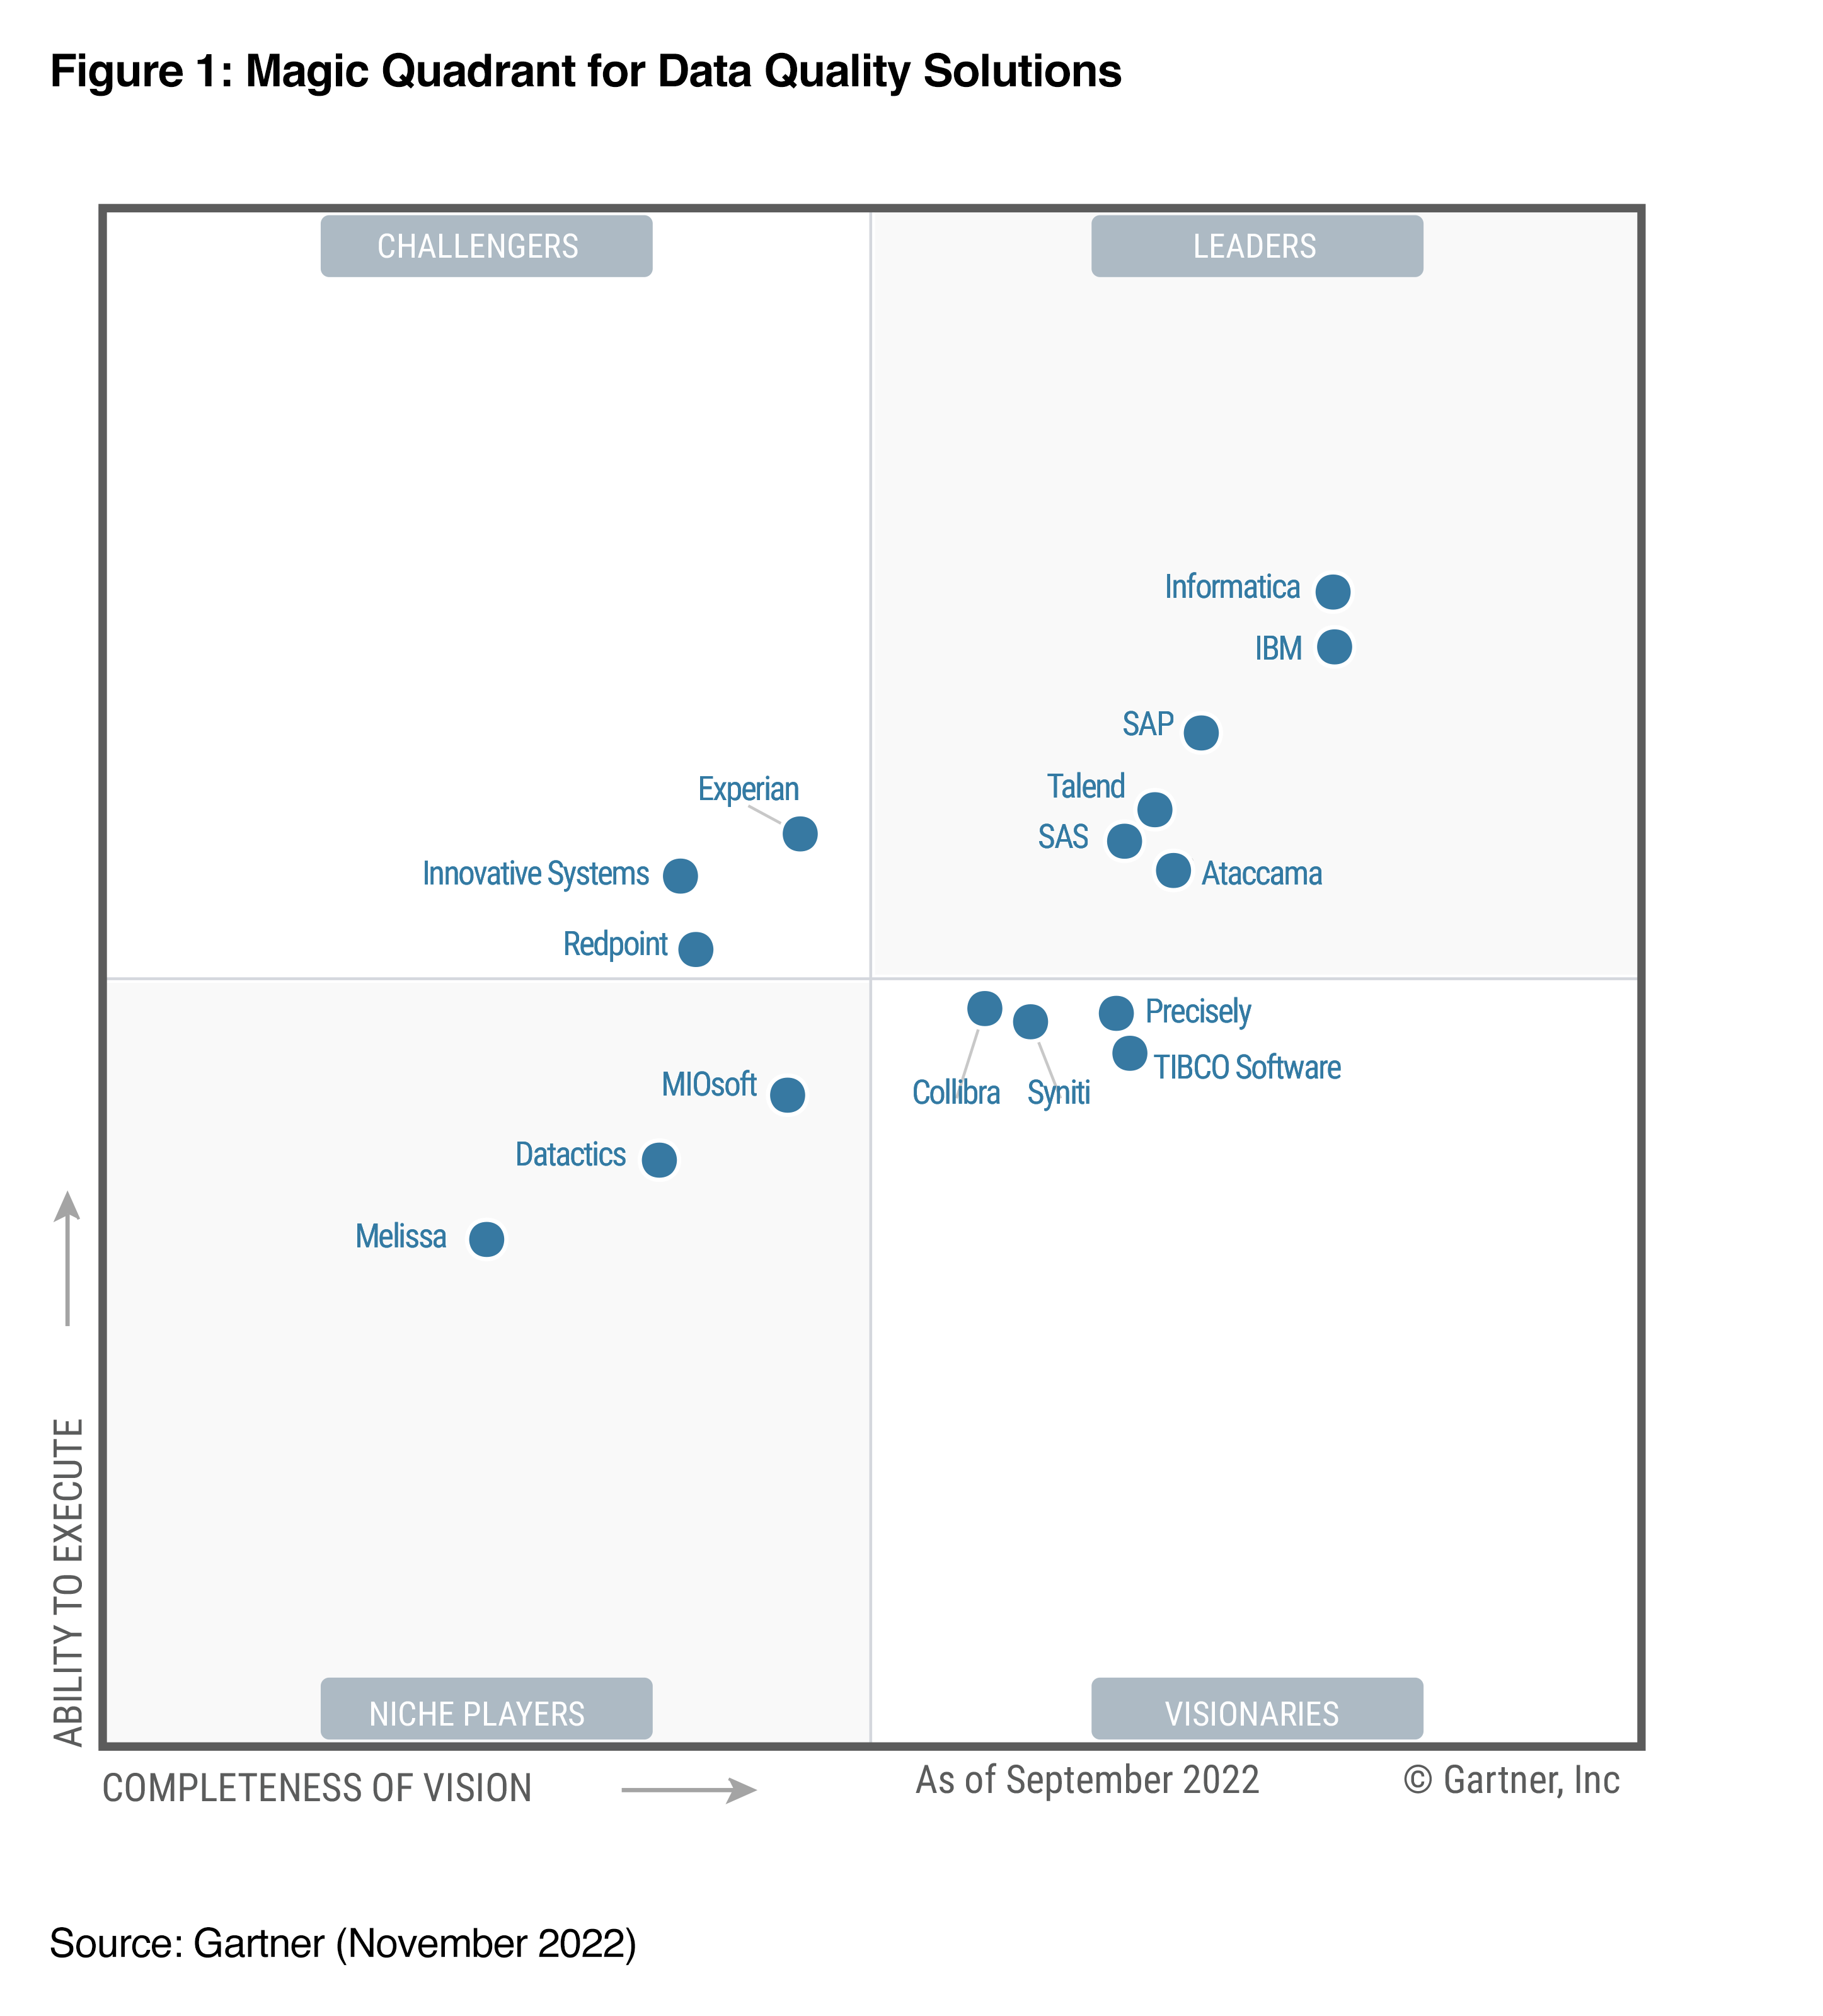 Syniti is a Visionary in the 2022 Gartner Magic Quadrant for Data Quality Solutions